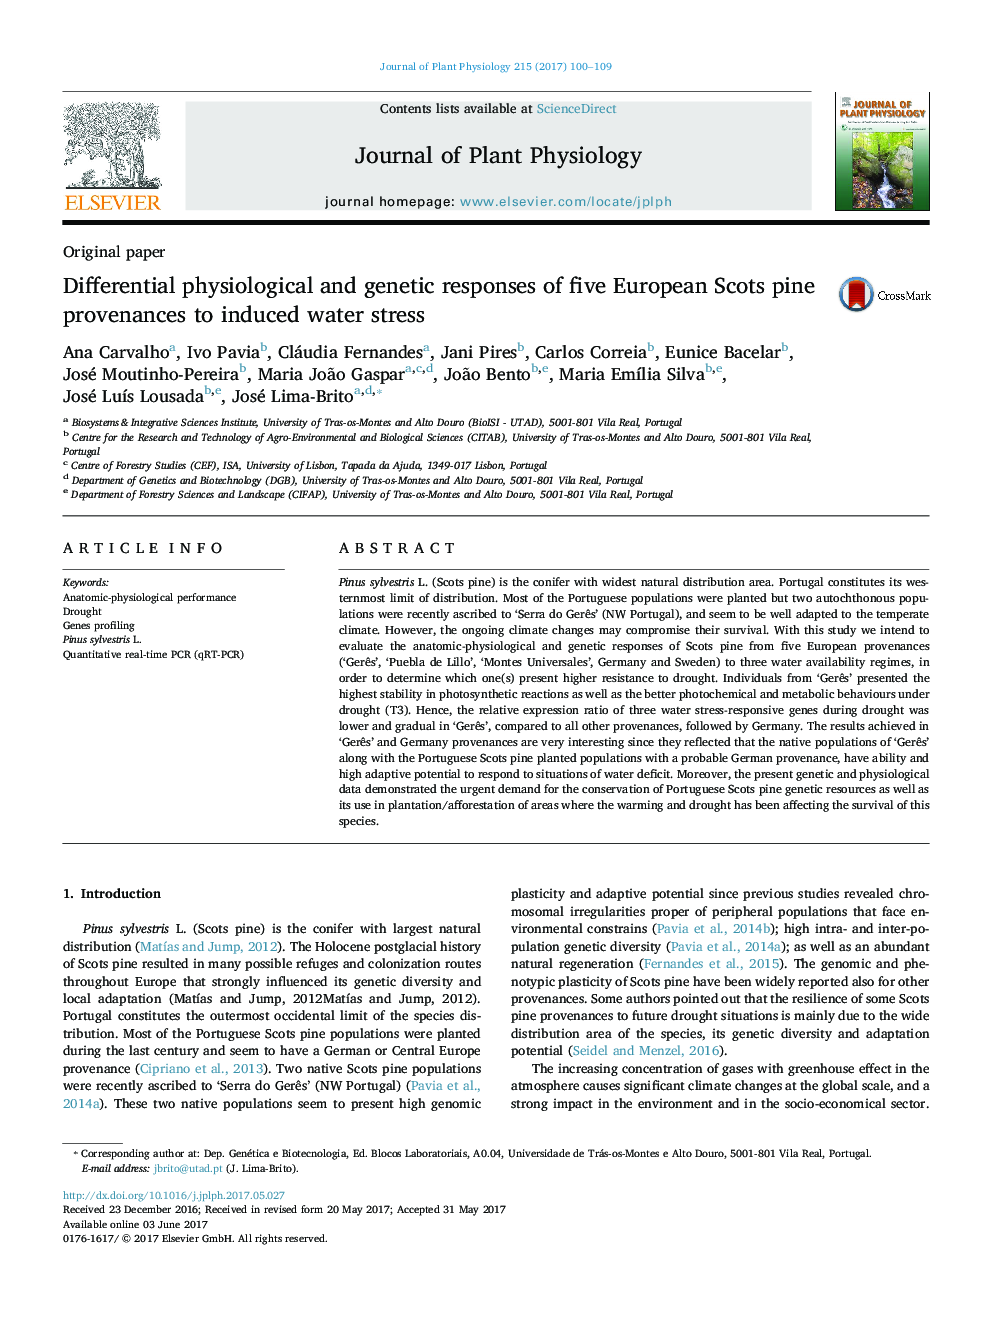 Original paperDifferential physiological and genetic responses of five European Scots pine provenances to induced water stress